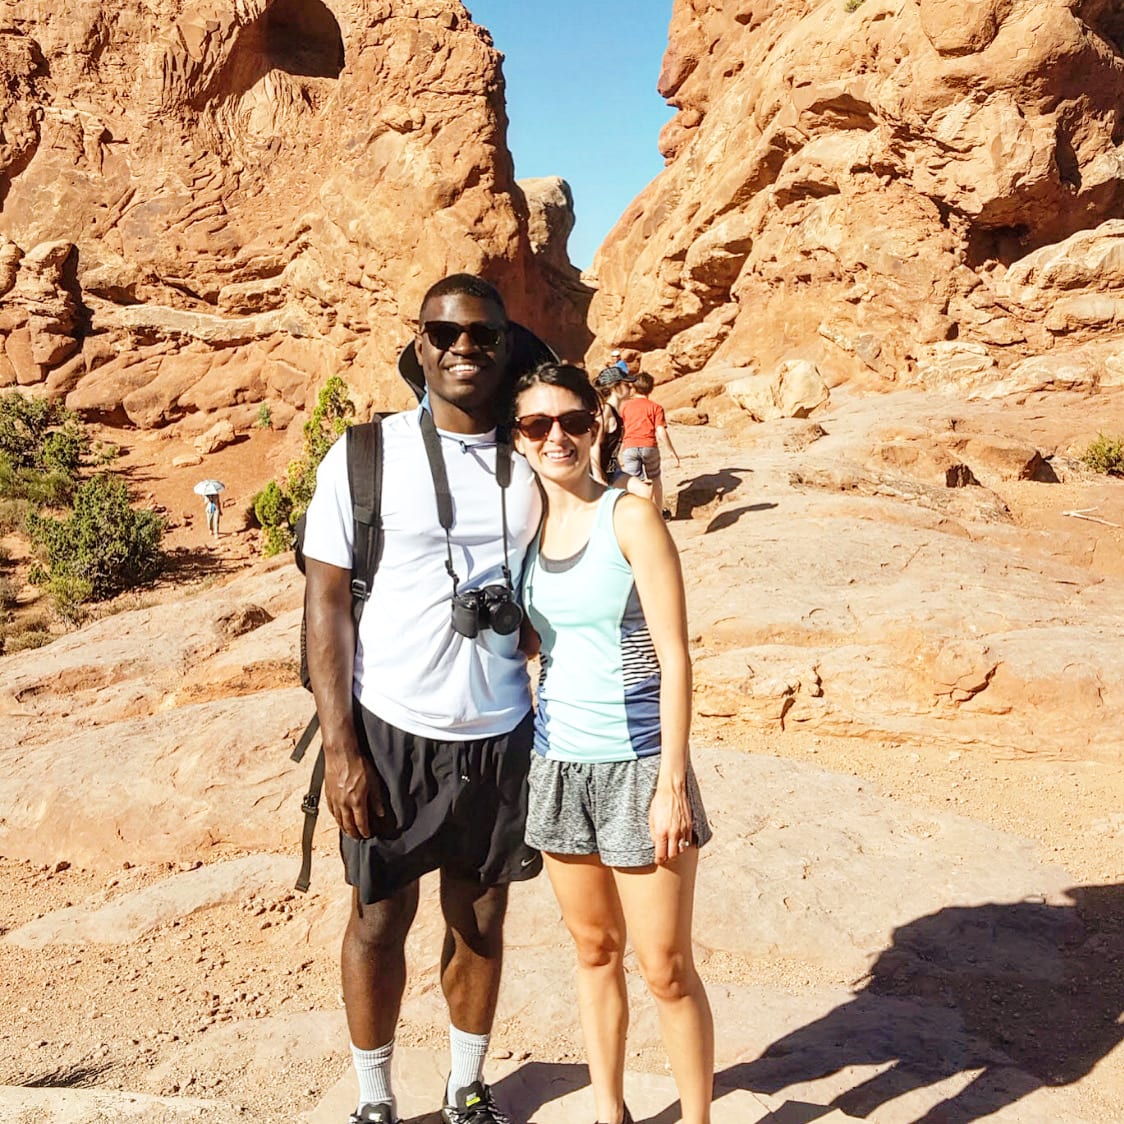 a black man with sunglasses and a camera around his neck poses with a white woman wearing sunglasses on a hiking trail in the desert